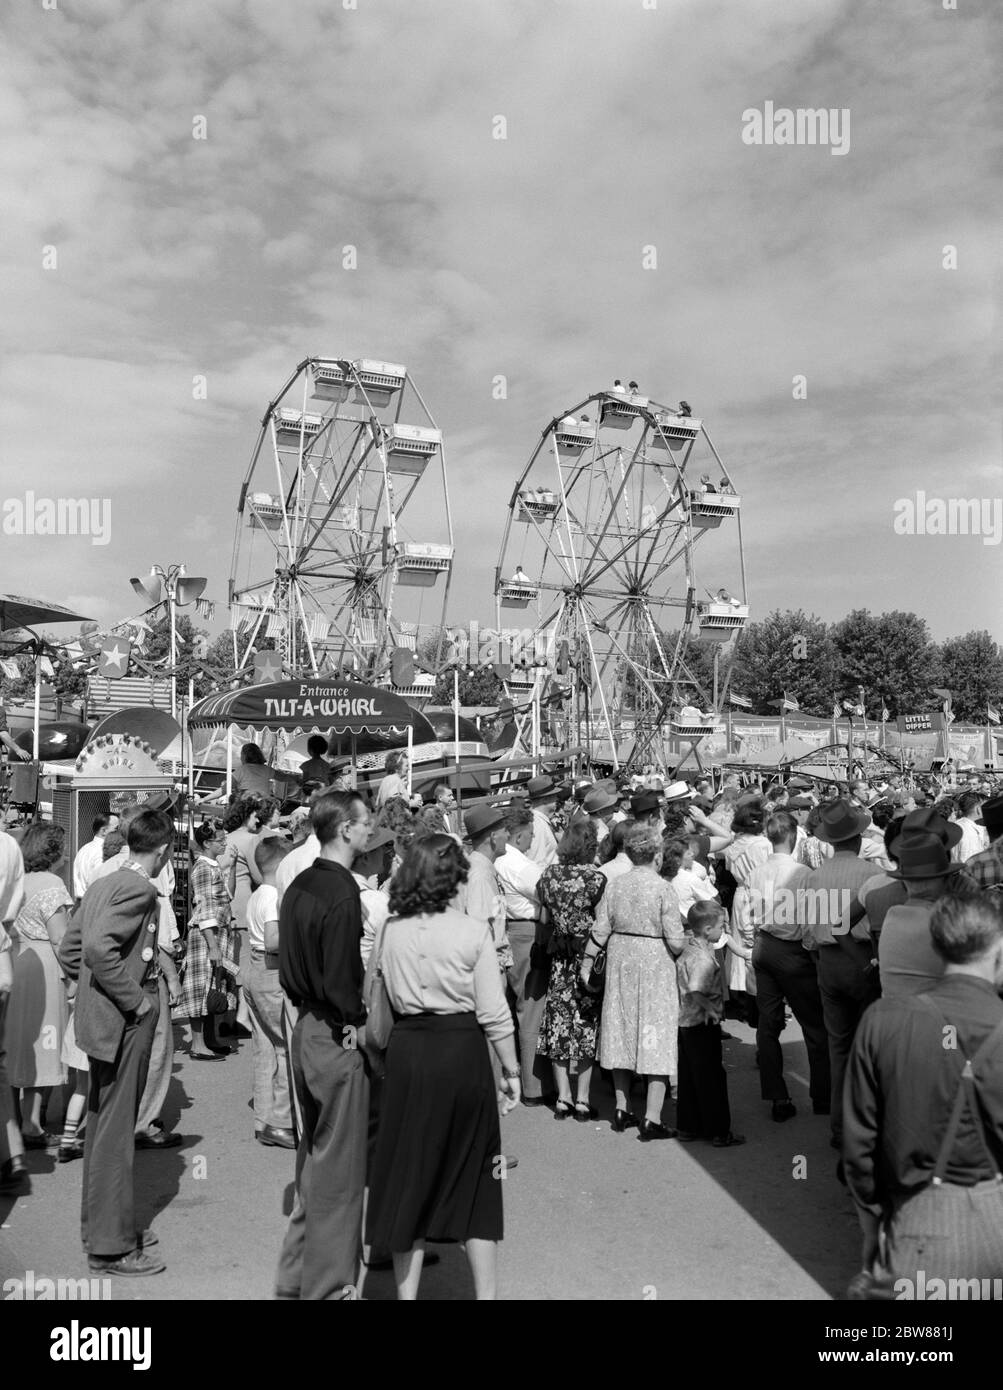 1940s 1950s CROWD AT LOCAL COUNTY FAIR CARNIVAL WITH 2 FERRIS WHEELS IN BACKGROUND - f3717 HEL001 HARS COUNTRY FAIR FAIRS AMUSEMENTS DAYLIGHT RIDES TOGETHERNESS BLACK AND WHITE CAUCASIAN ETHNICITY FERRIS WHEEL OLD FASHIONED Stock Photo